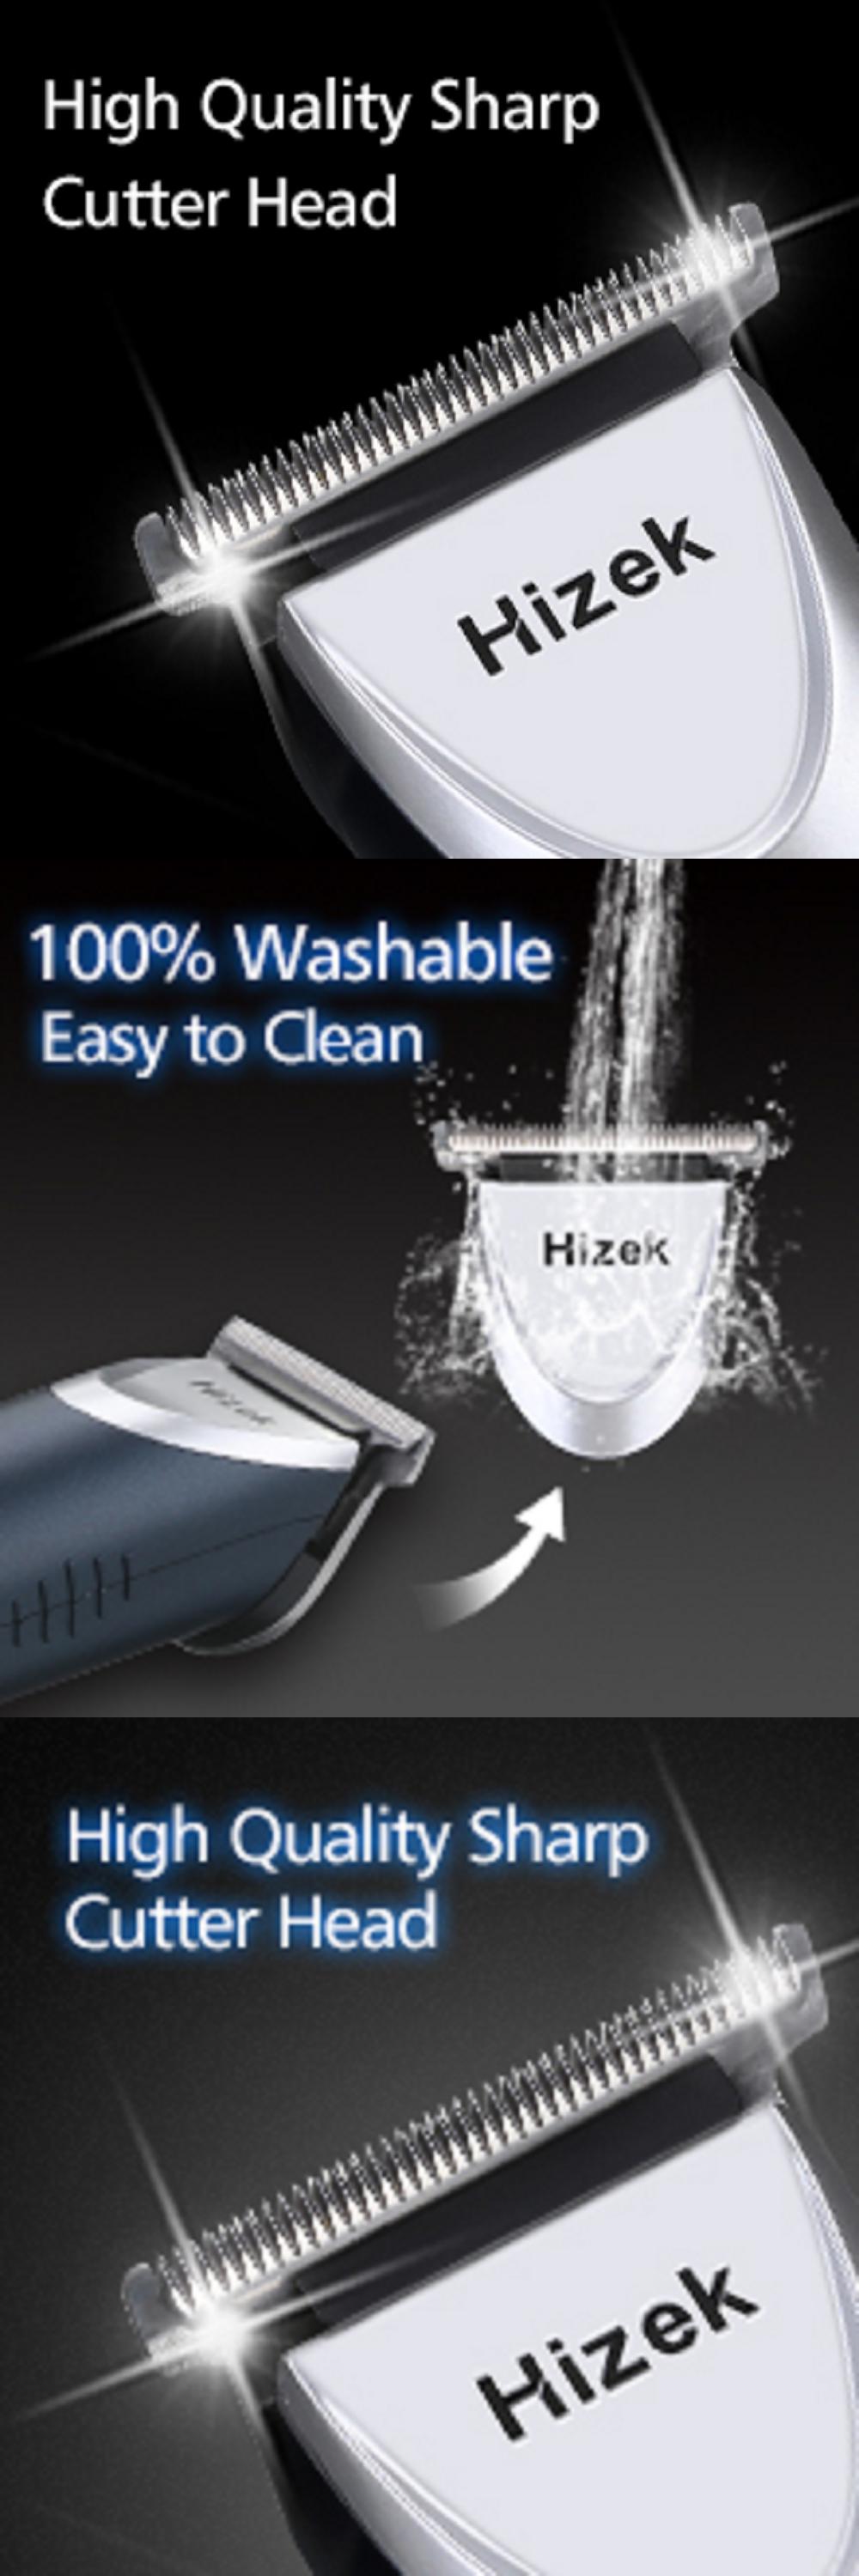 Hizek-A96-Hair-Clipper-Waterproof-Cordless-Mens-Trimmer-with-3-Adjustable-Speeds-4-Replacement-Head--1898313-4